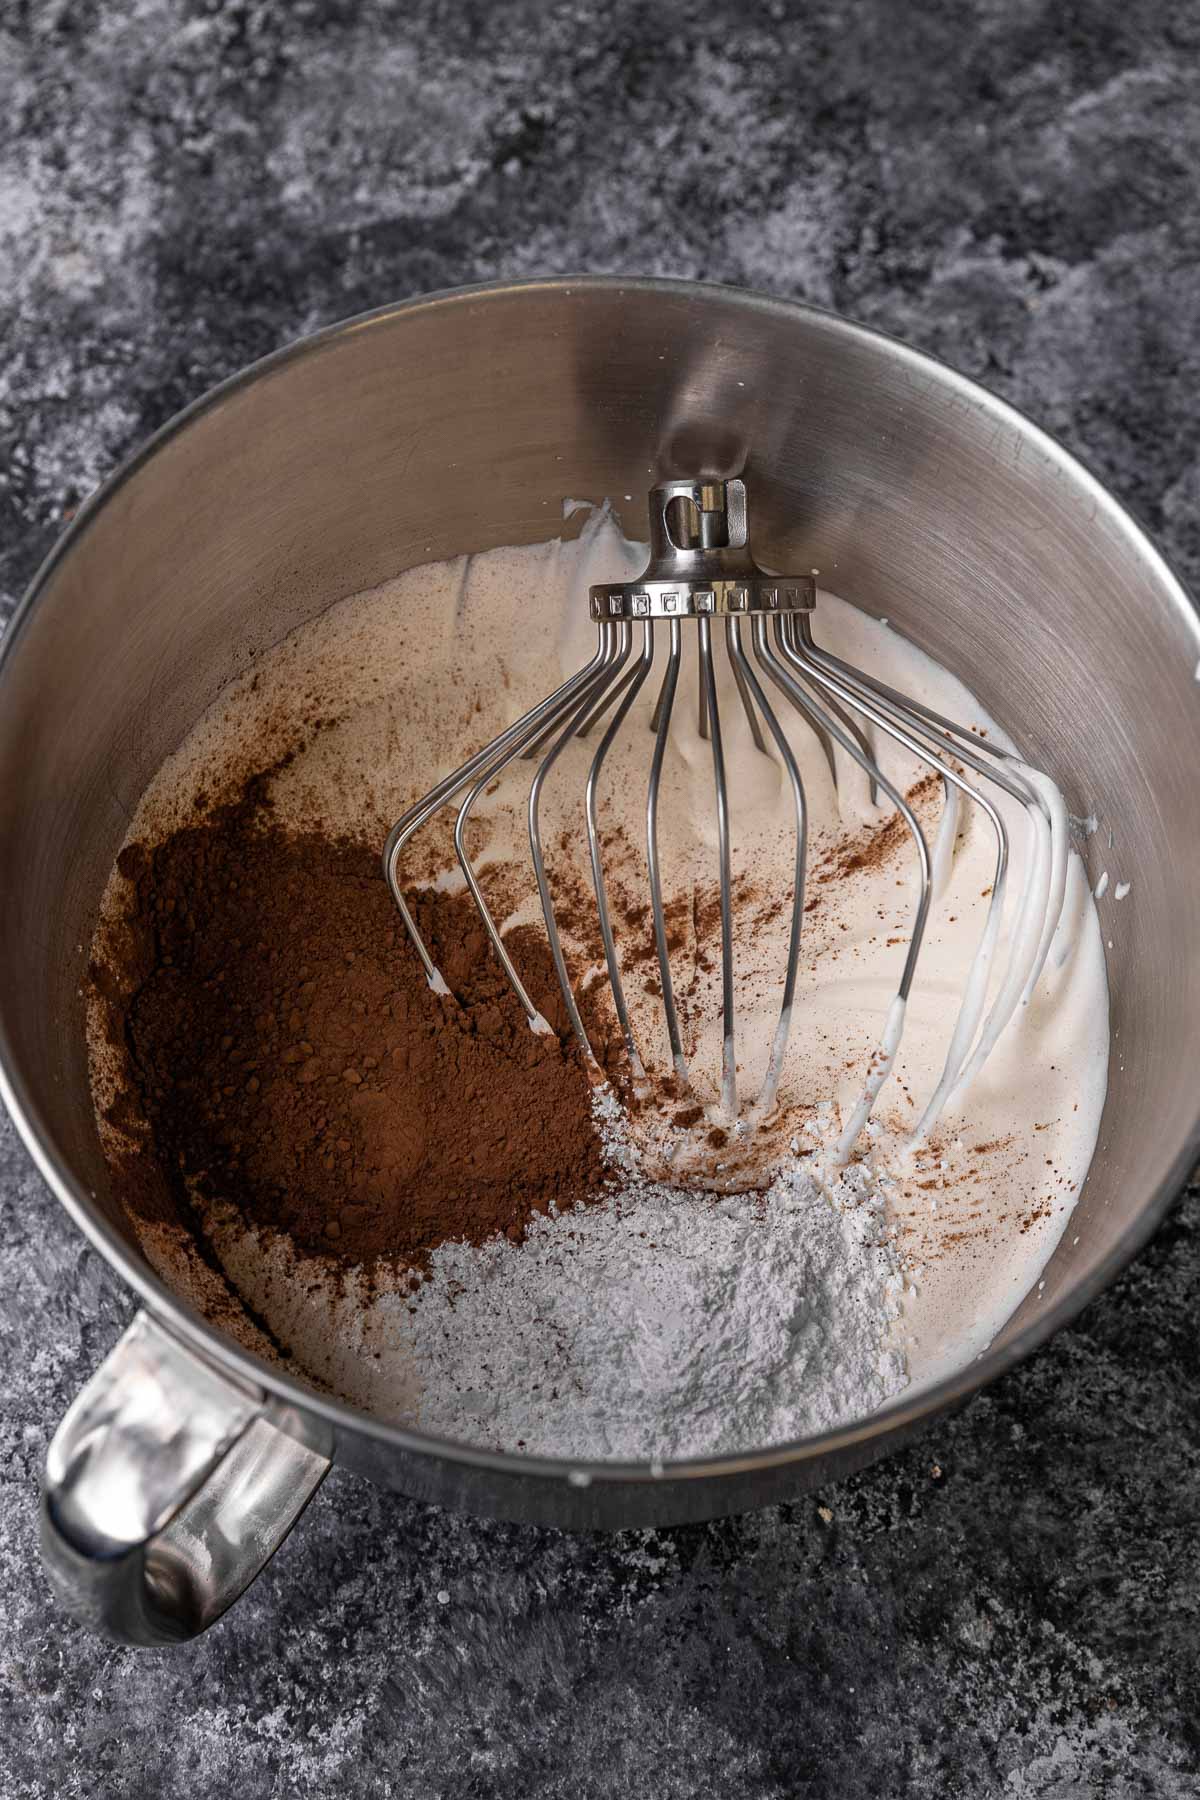 Chocolate Whipped Cream, chocolate being added to the mixing bowl